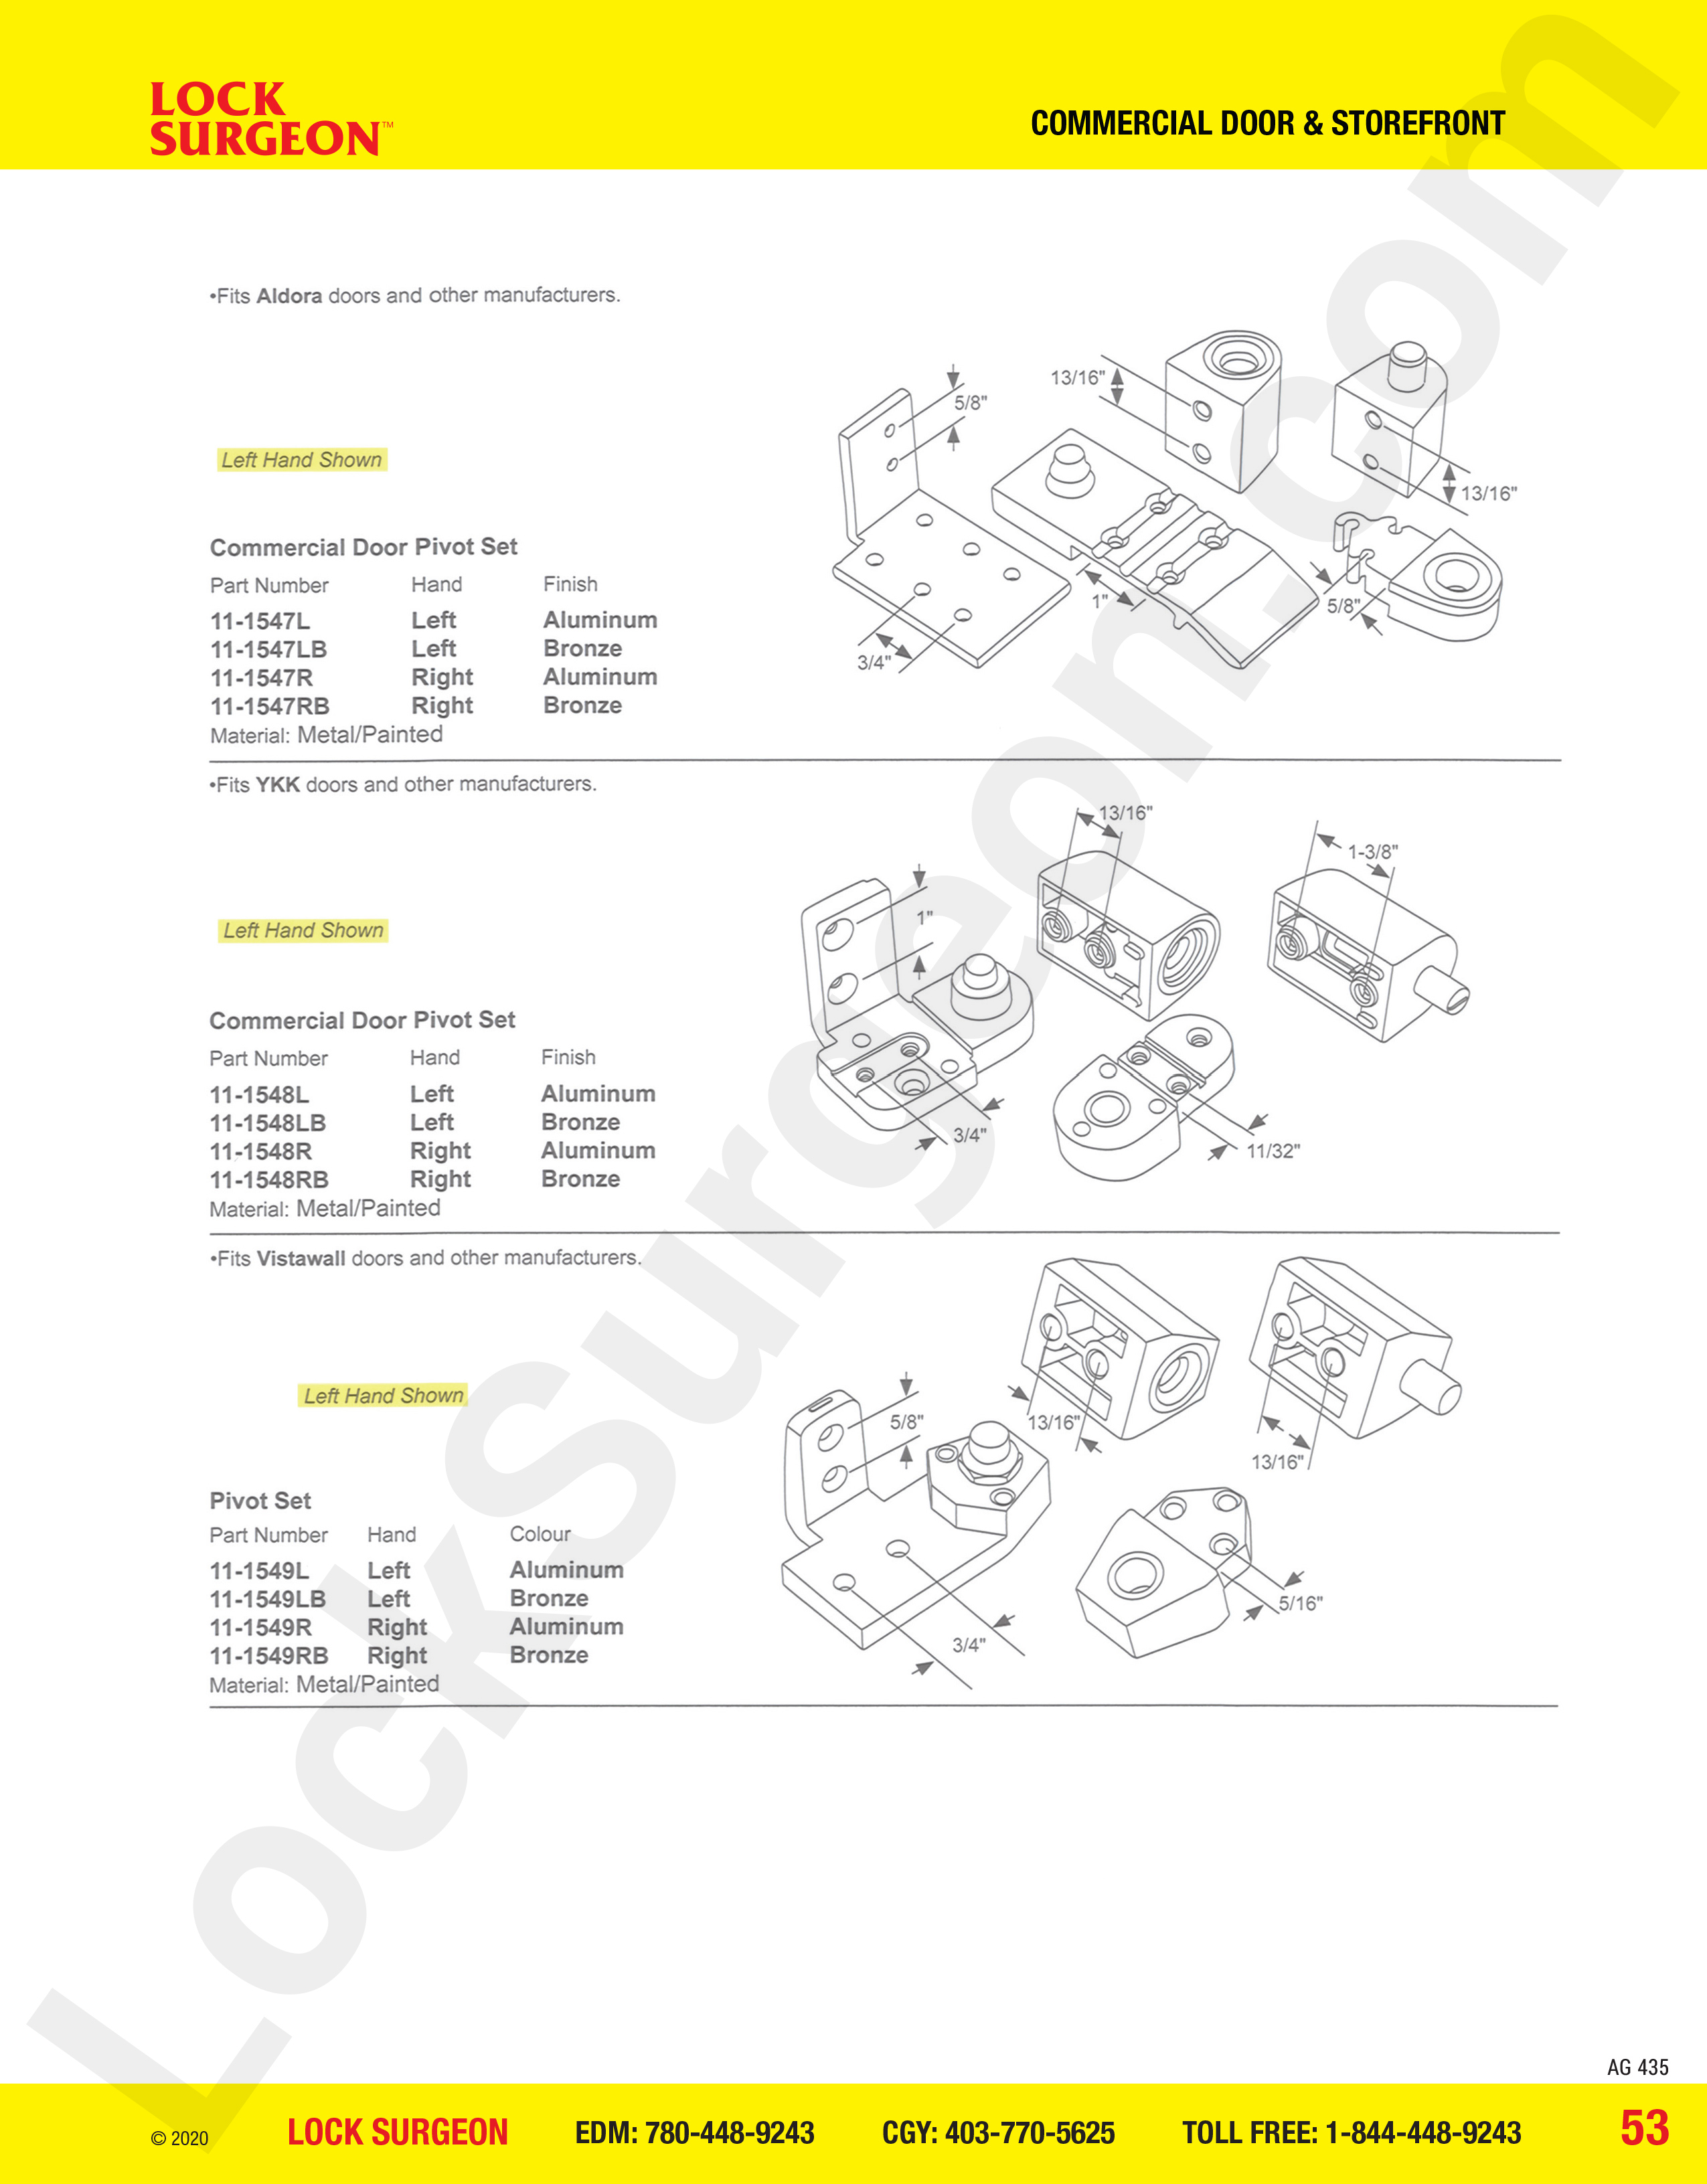 Commercial Door and Storefront parts for commercial door pivot sets Acheson